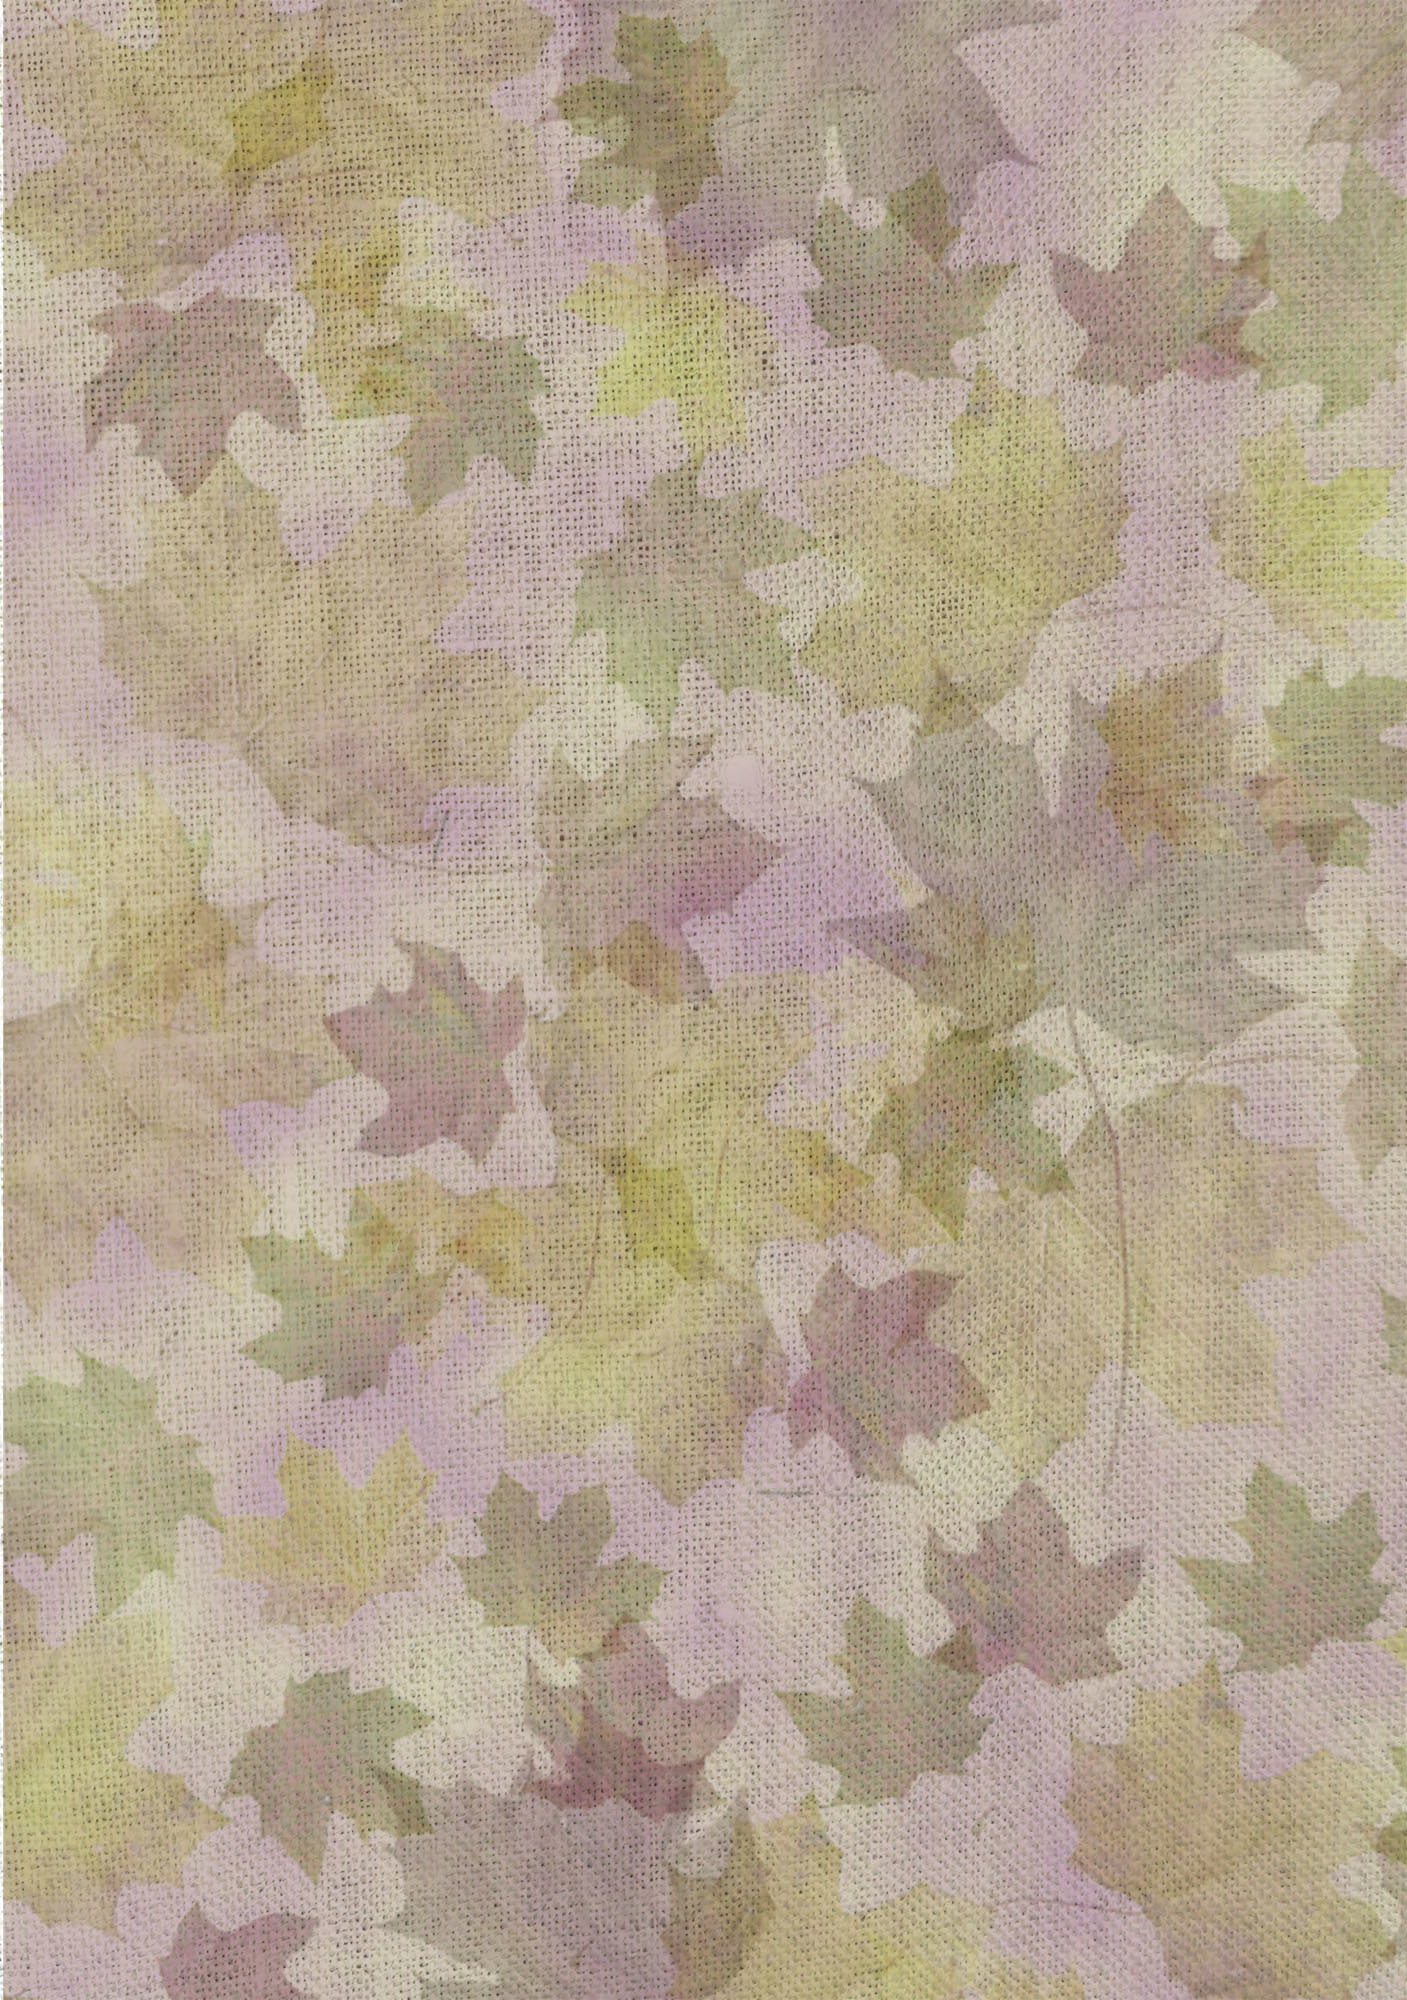 Autumn Leaves Patterned Cross Stitch Fabric